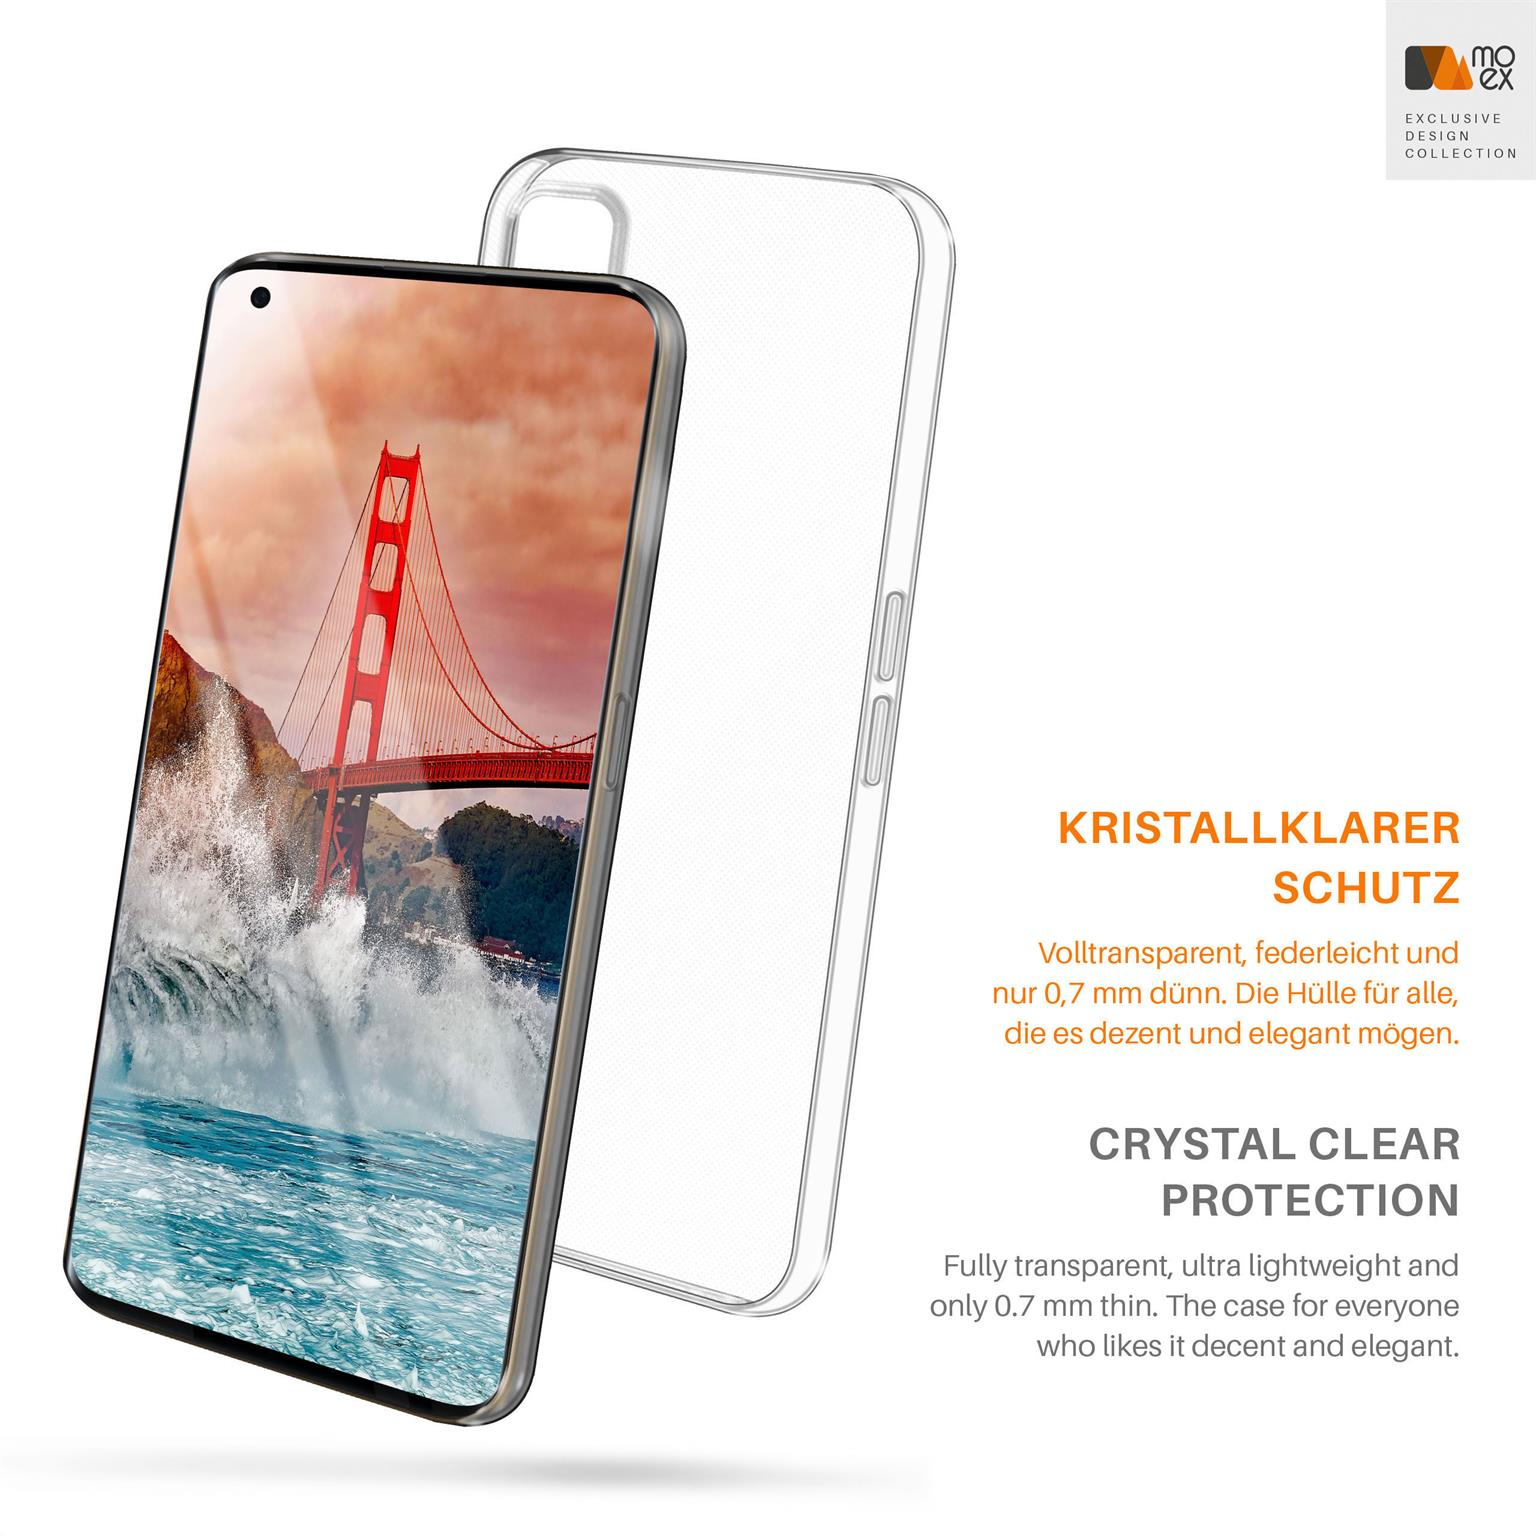 MOEX Aero Case, Backcover, Oppo, Crystal-Clear Find X2 Pro